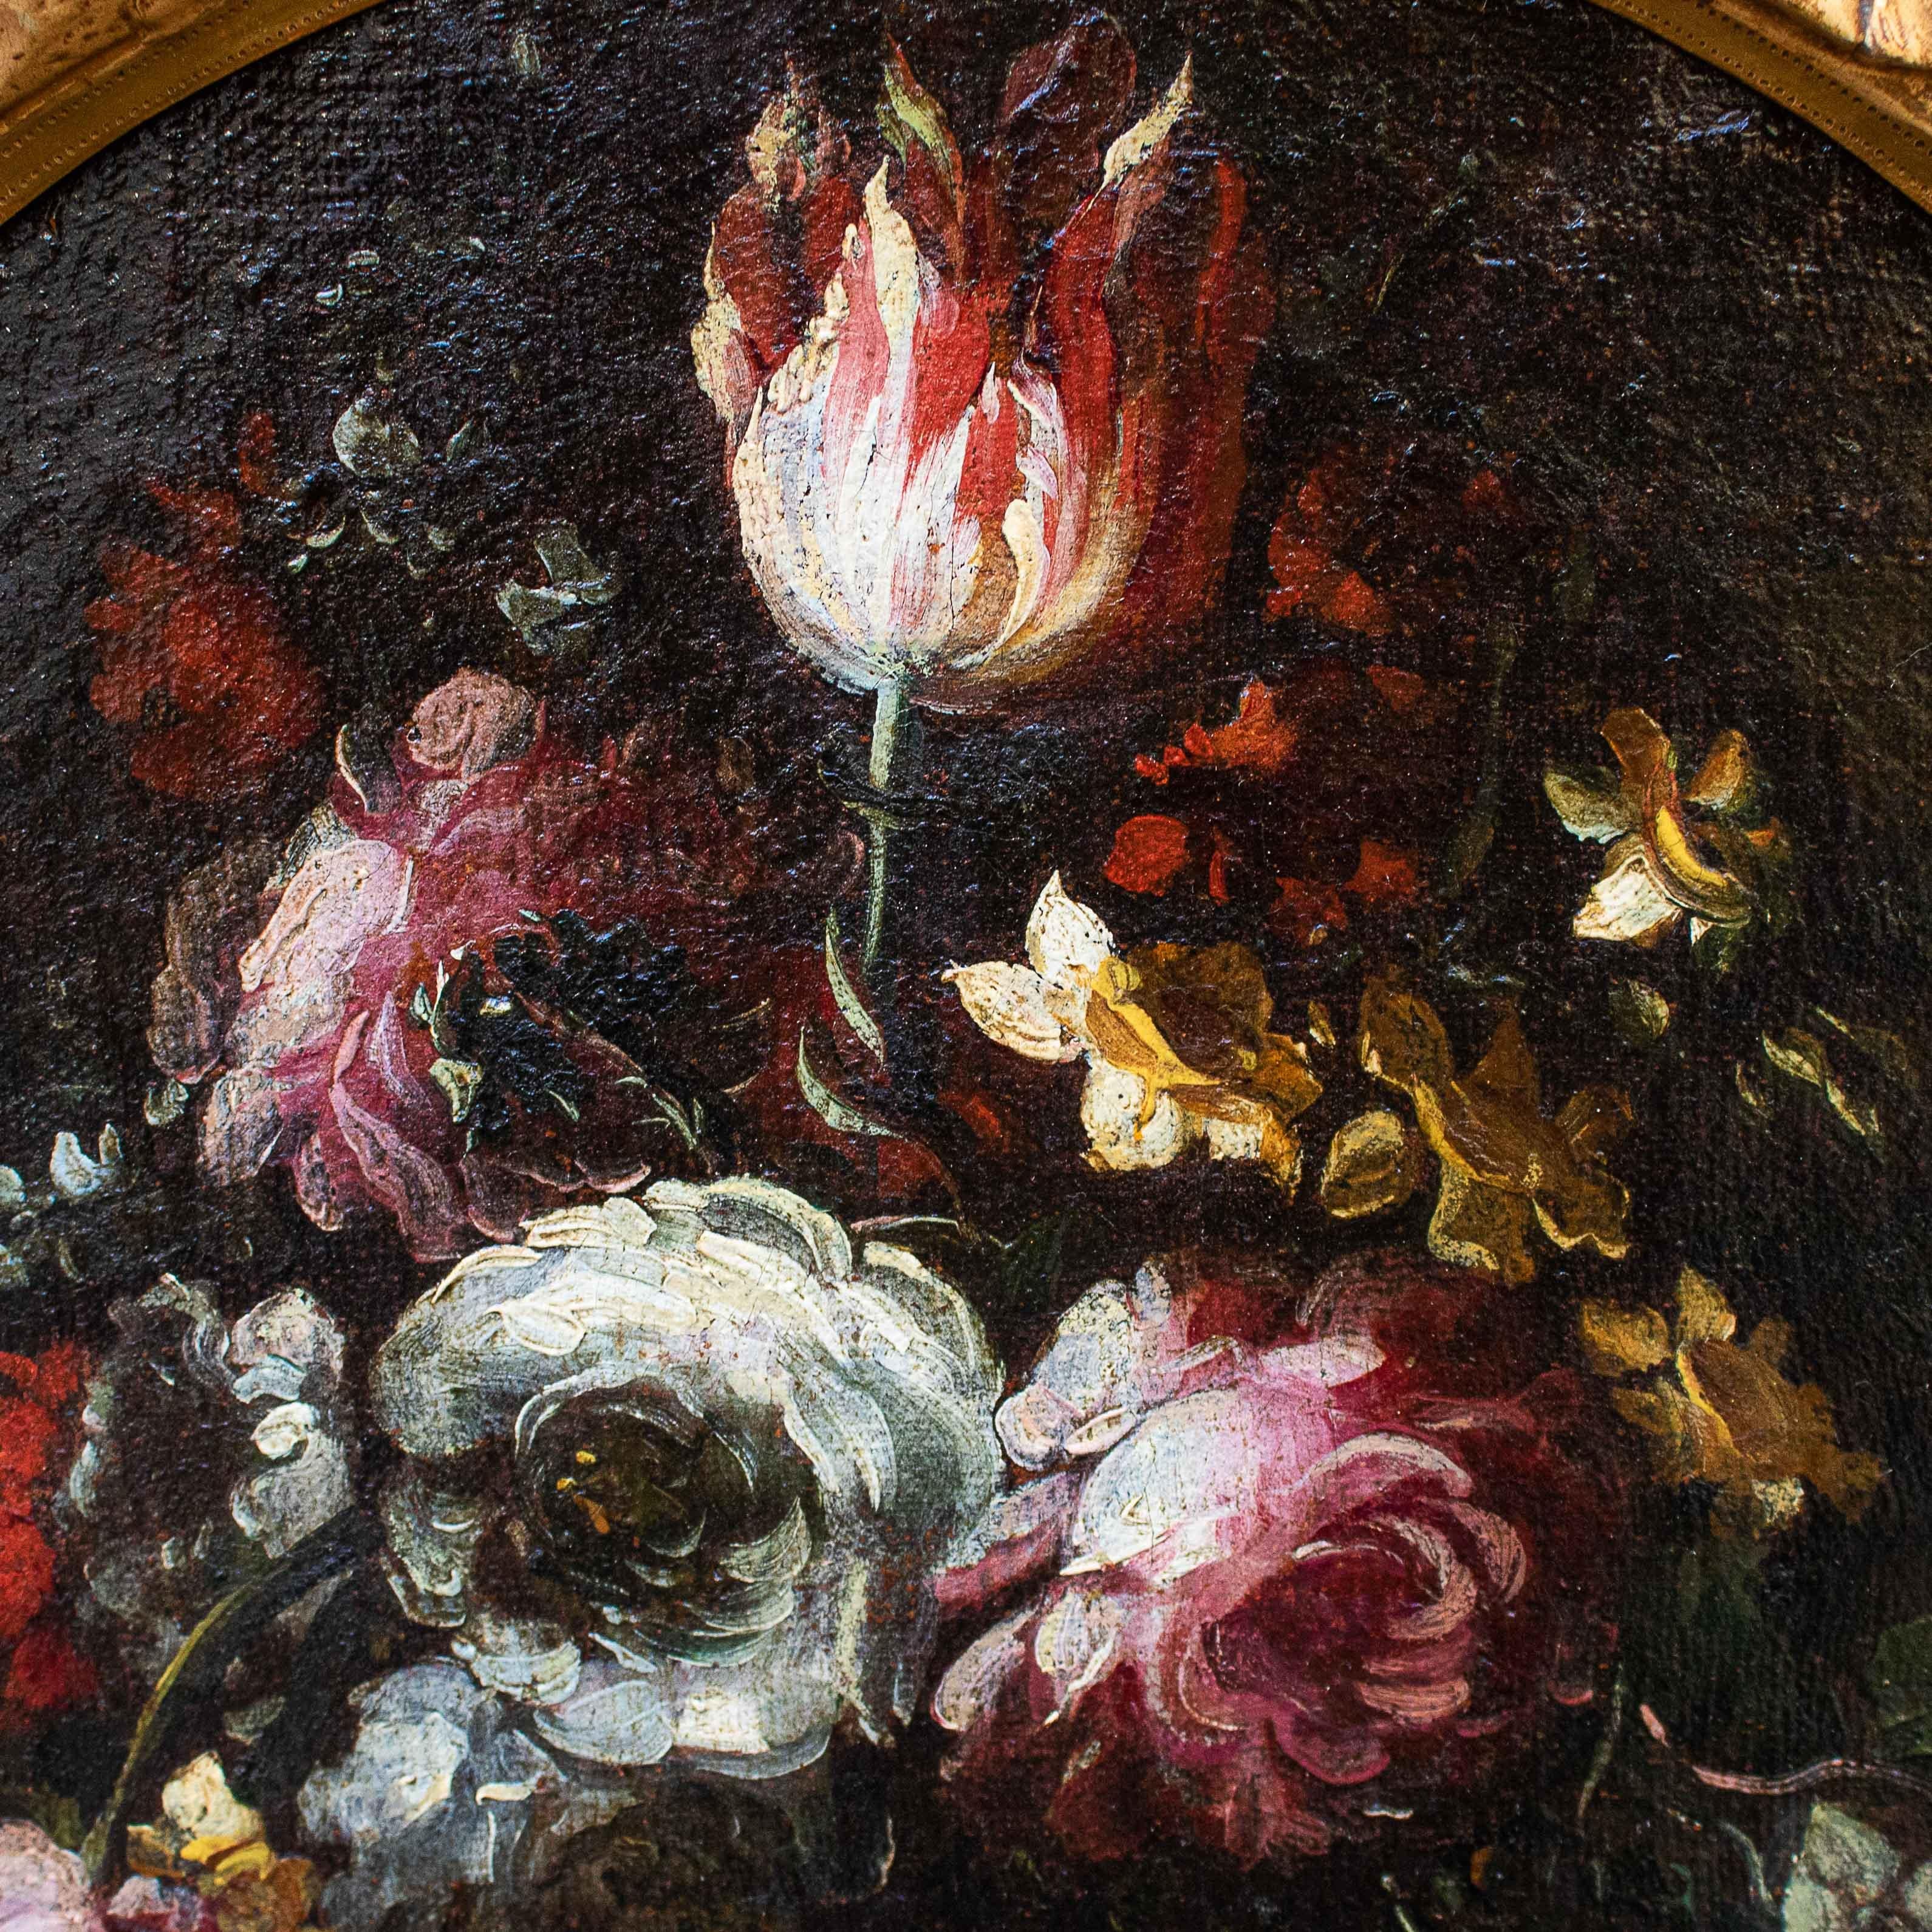 17th Century Still Lifes with Flowers Paintings Oil on Canvas 8